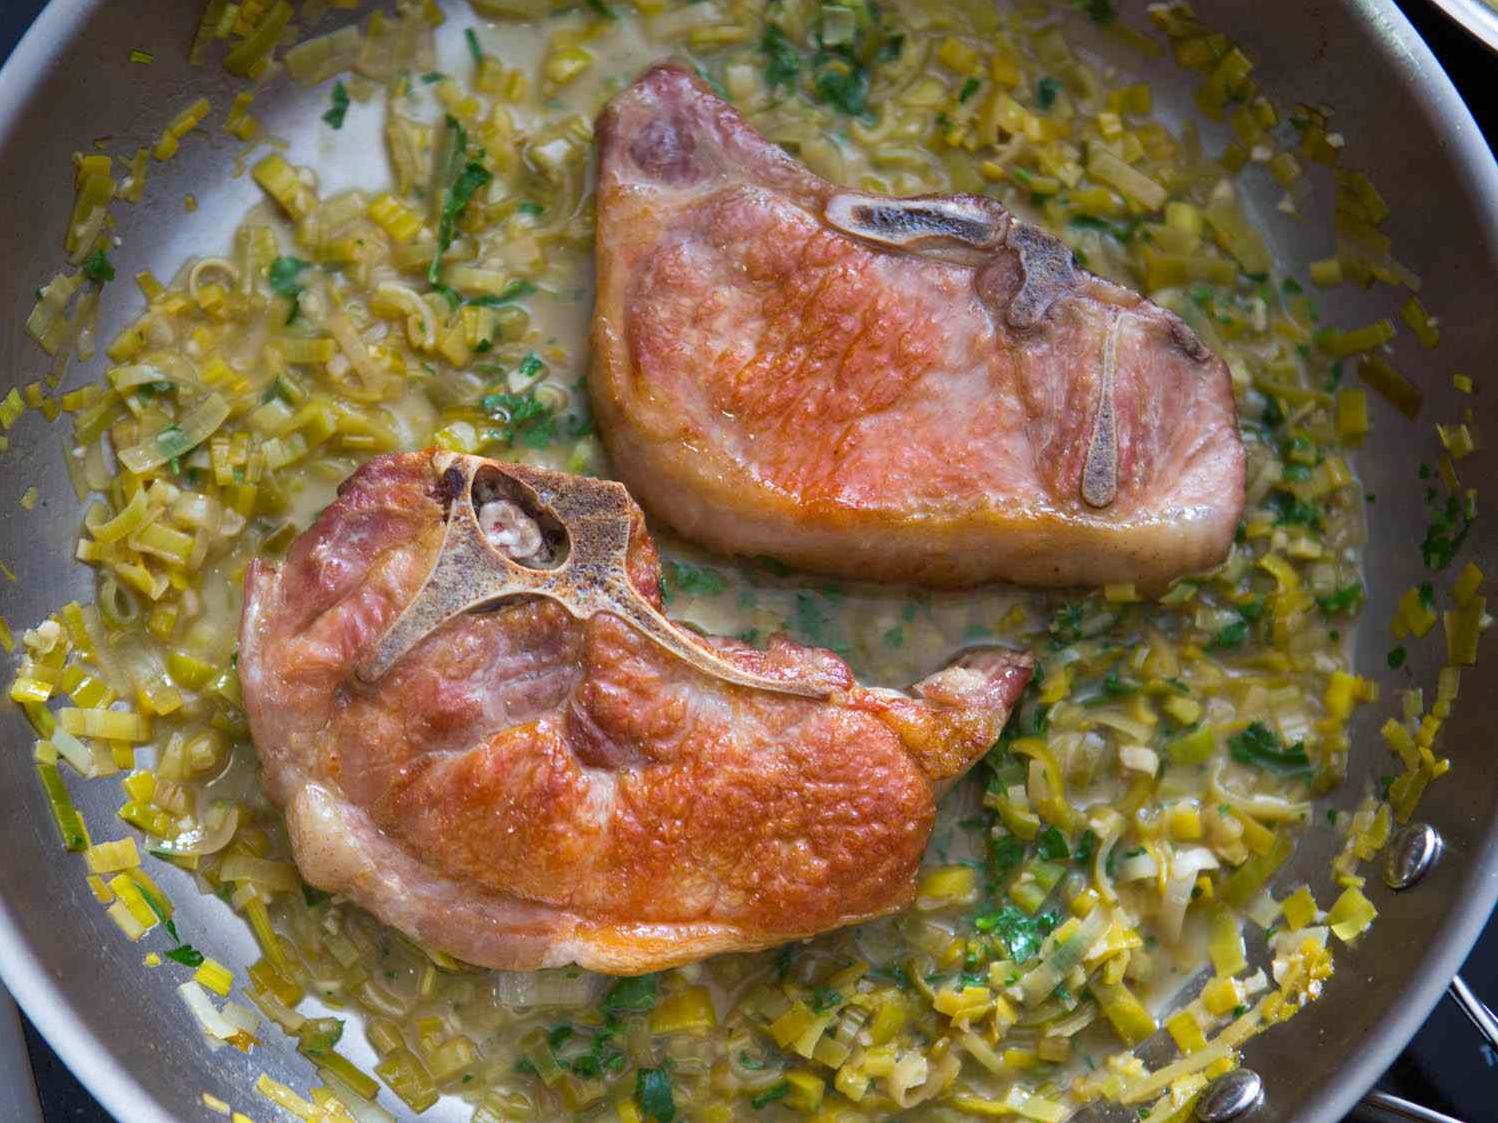  Juicy pork chops smothered in a flavorful pan sauce? Yes, please!